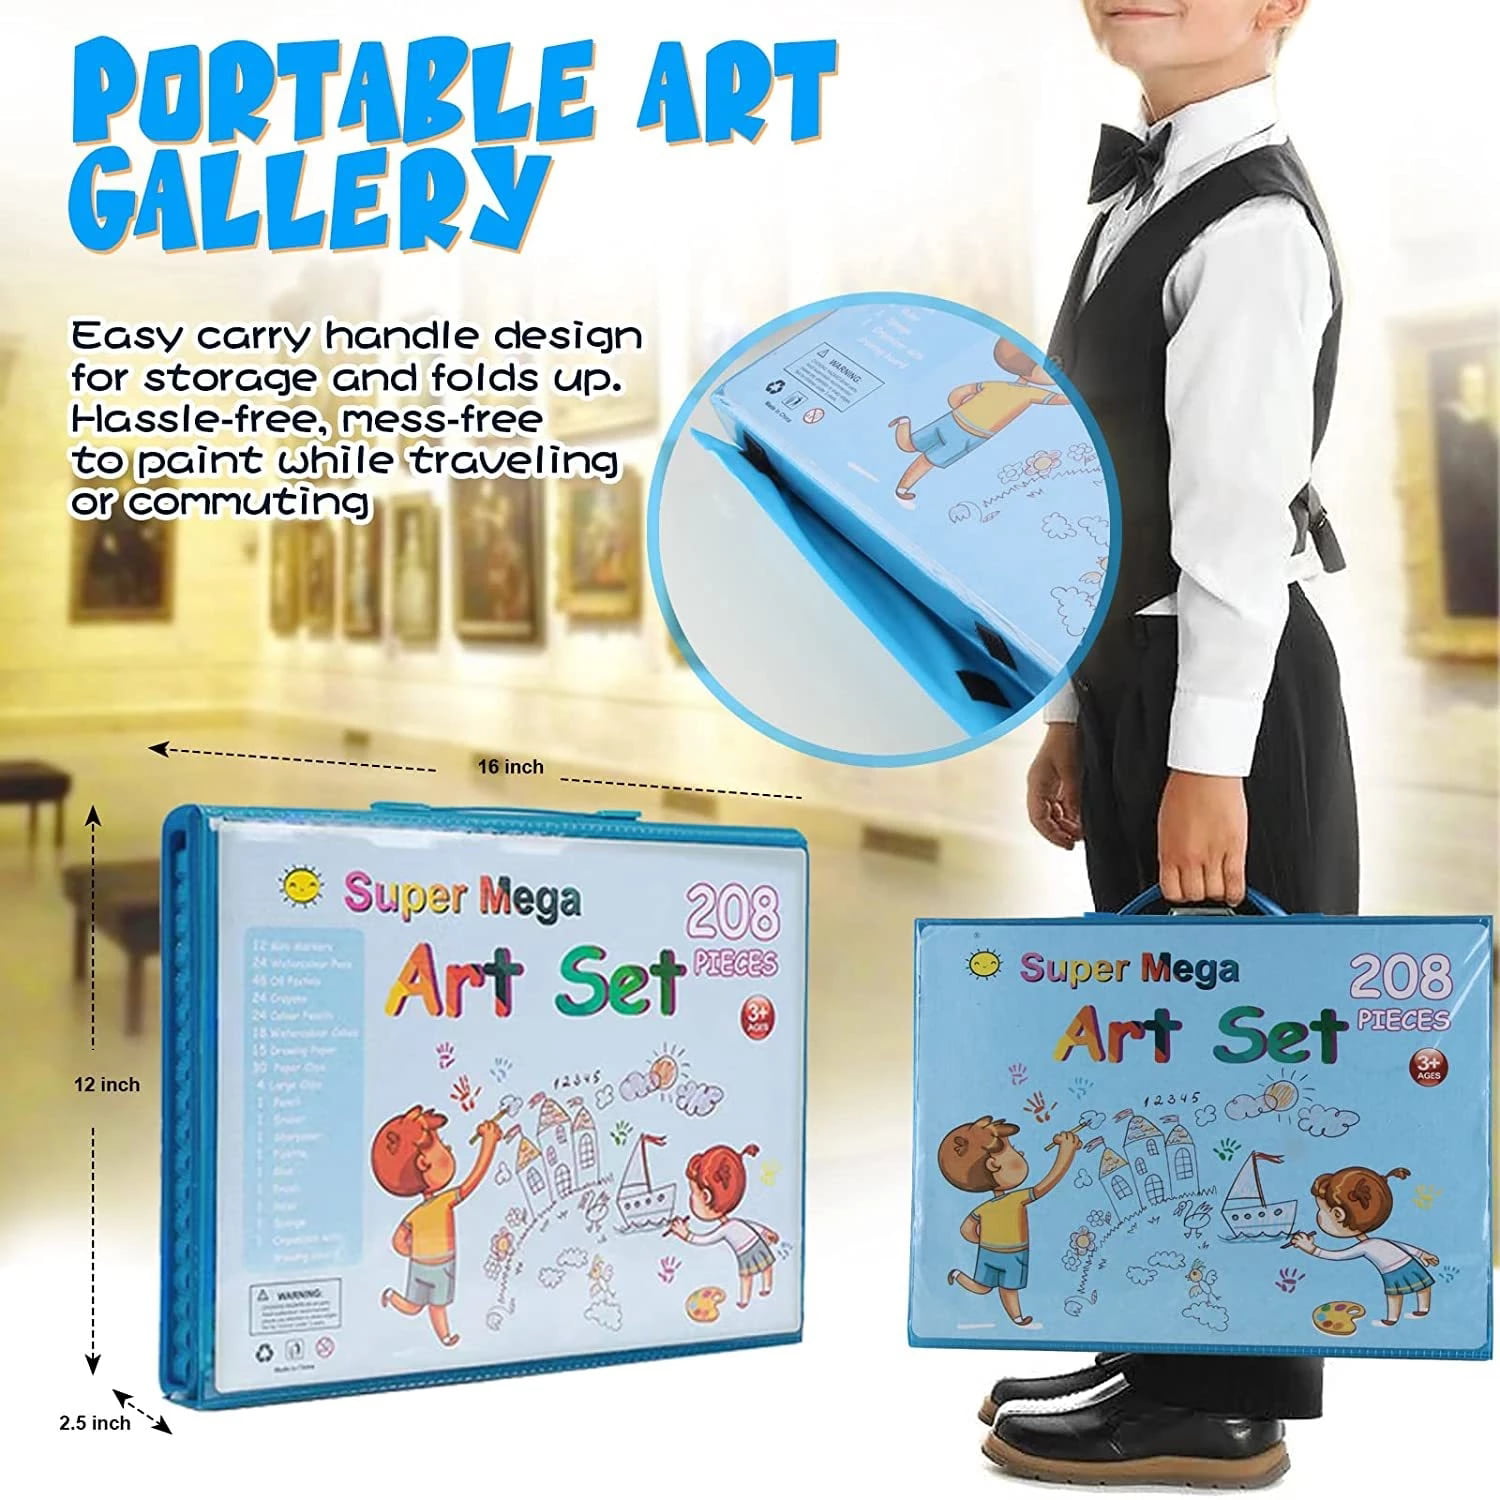 Art Set Box & Drawing Kit with Crayons, Oil Pastels, Colored Pence 208Pcs